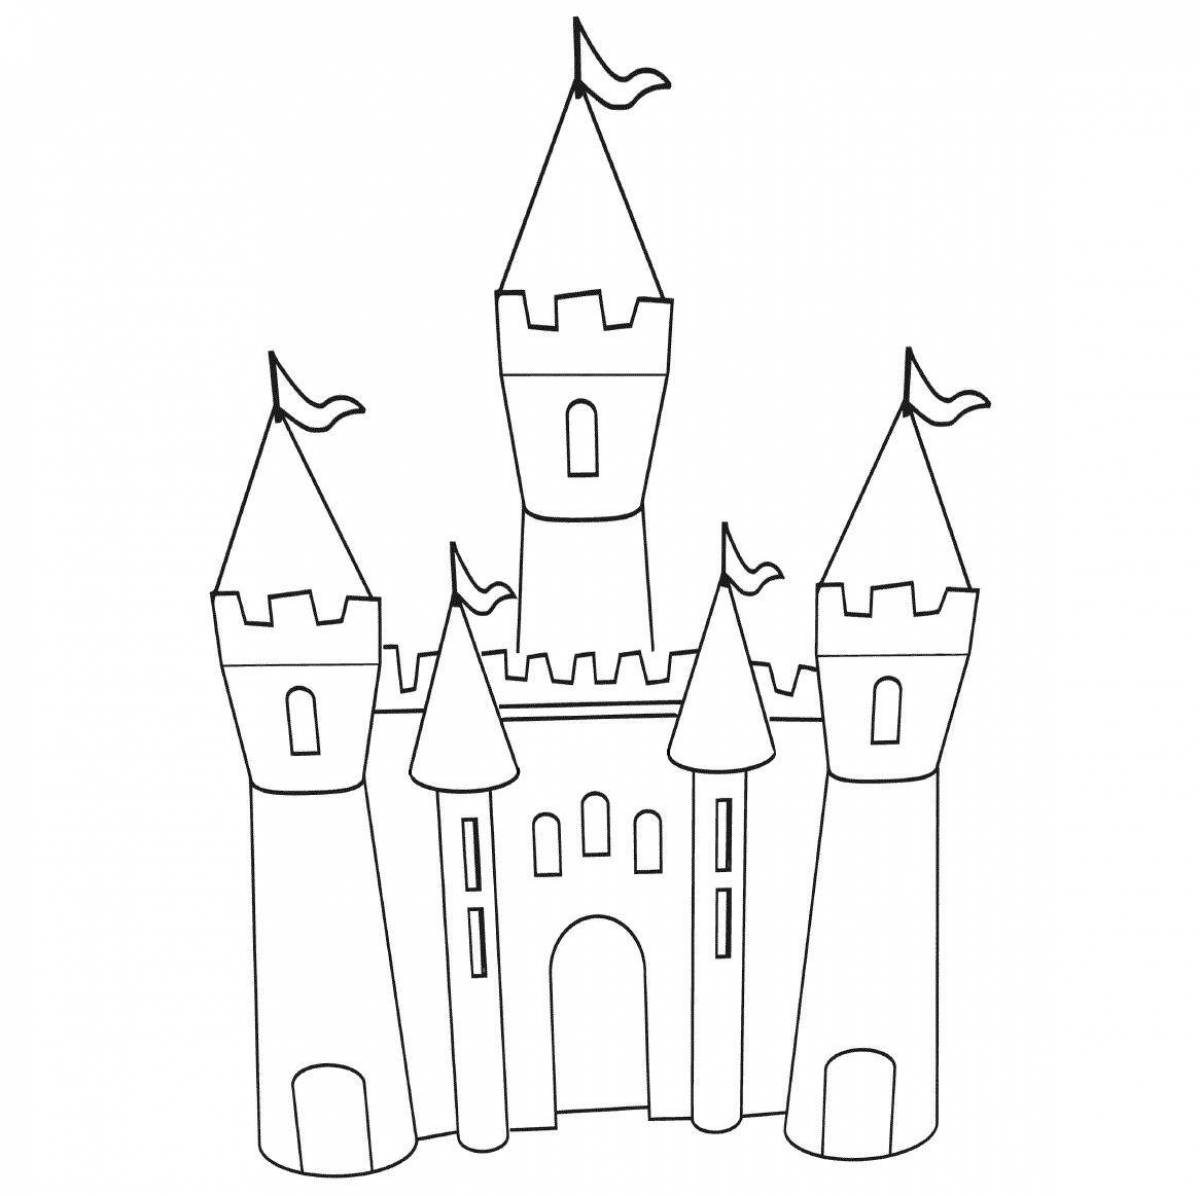 Coloring book bright castle of the snow queen